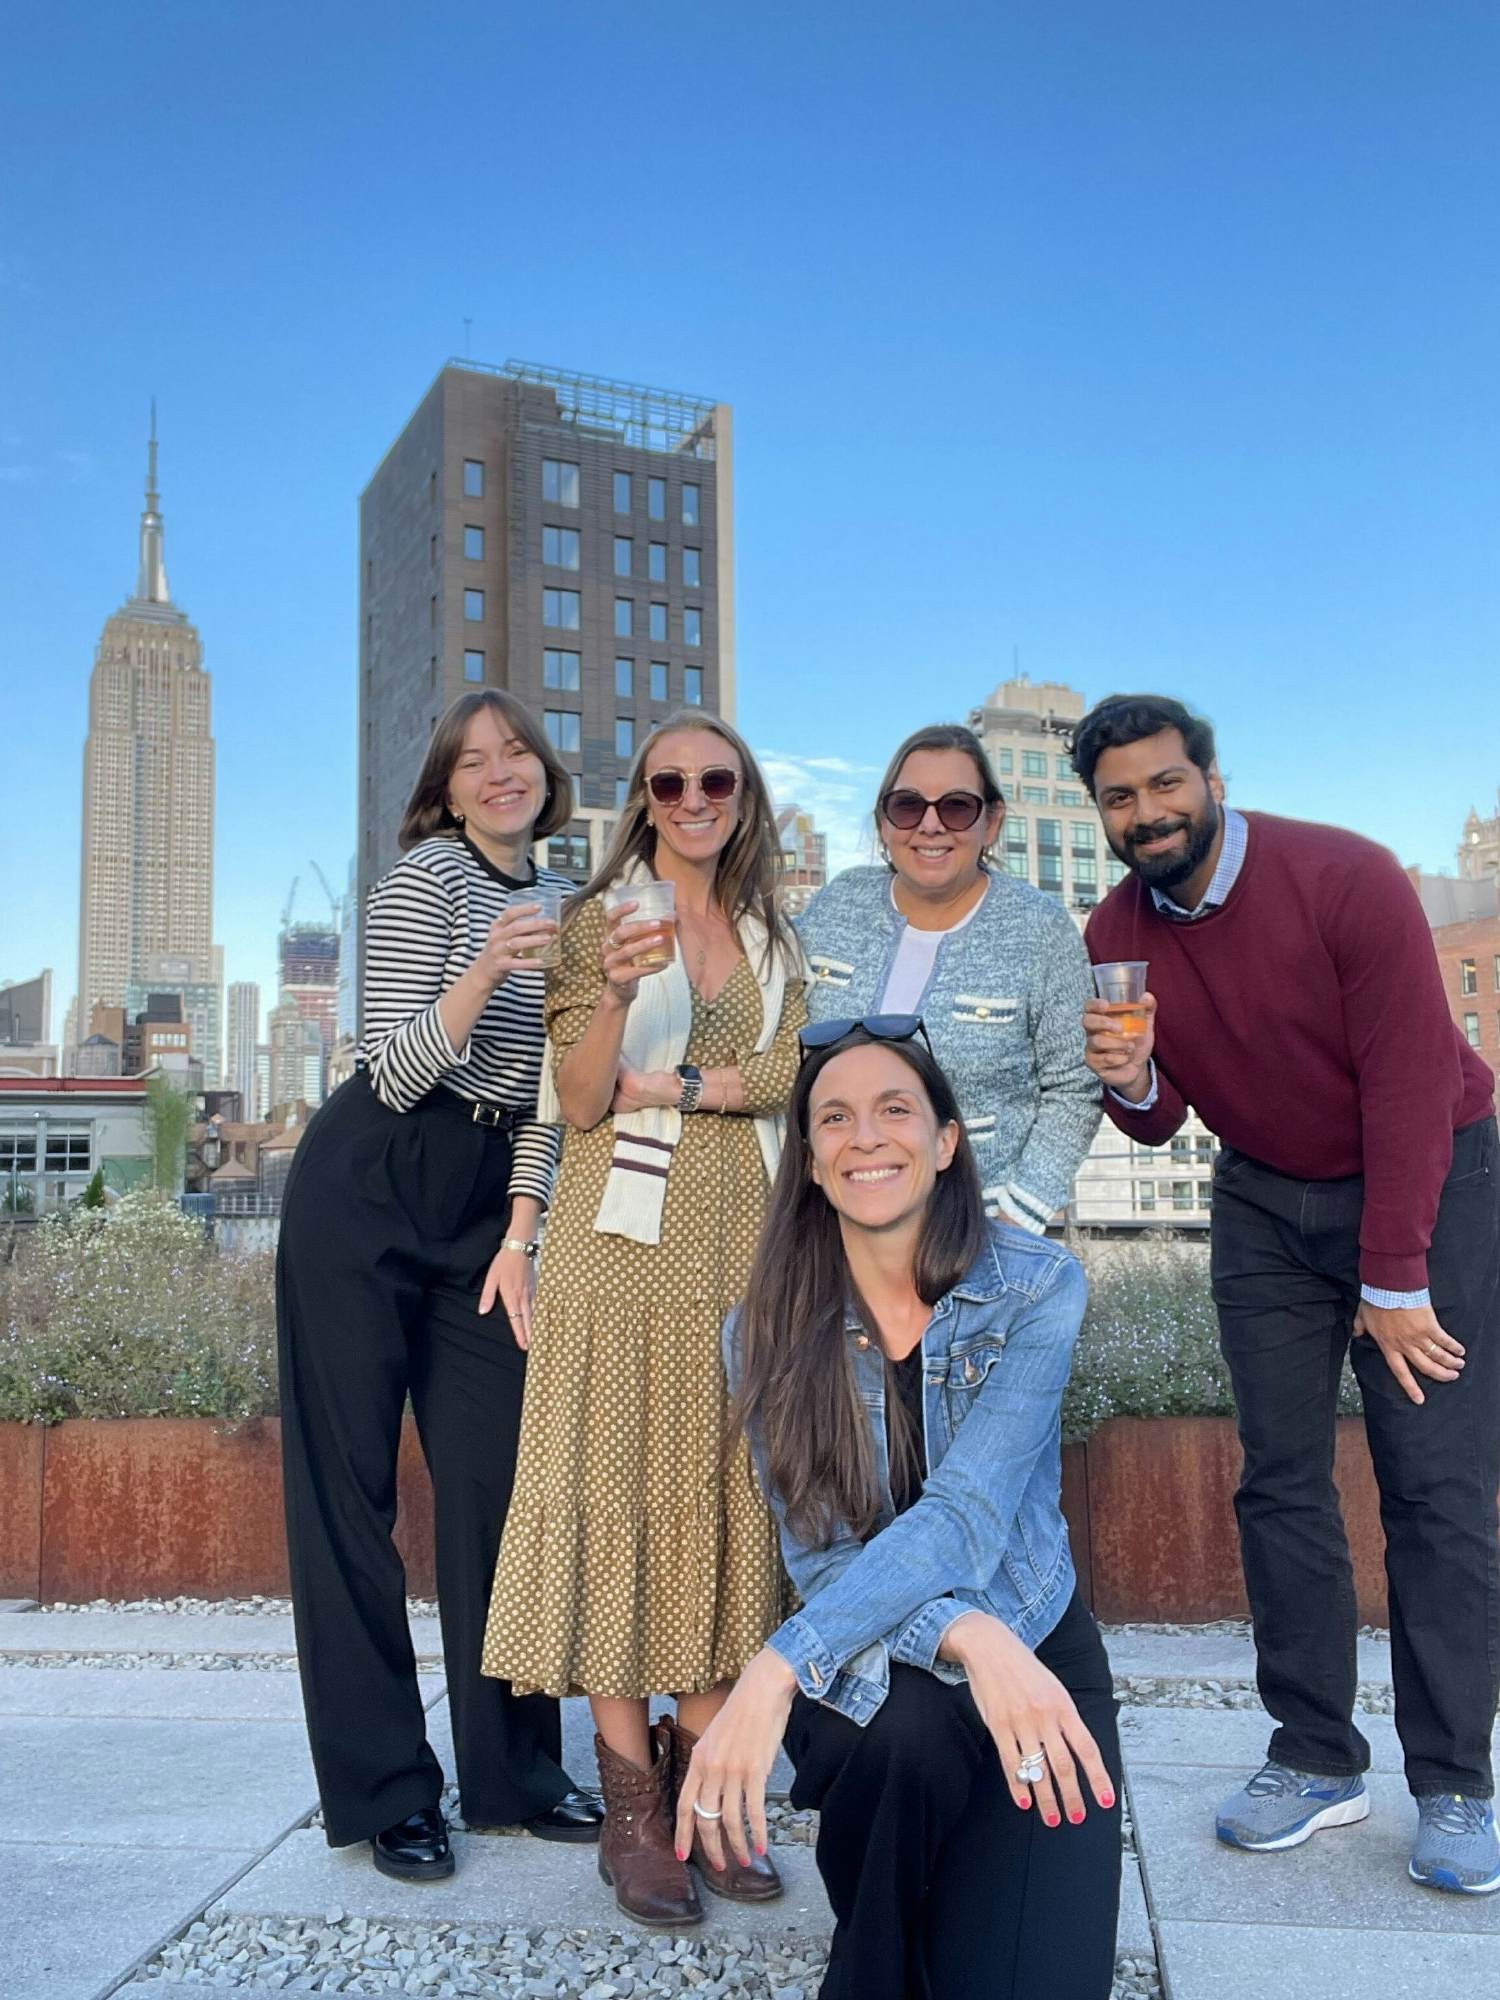 Enjoying our new office rooftop views!